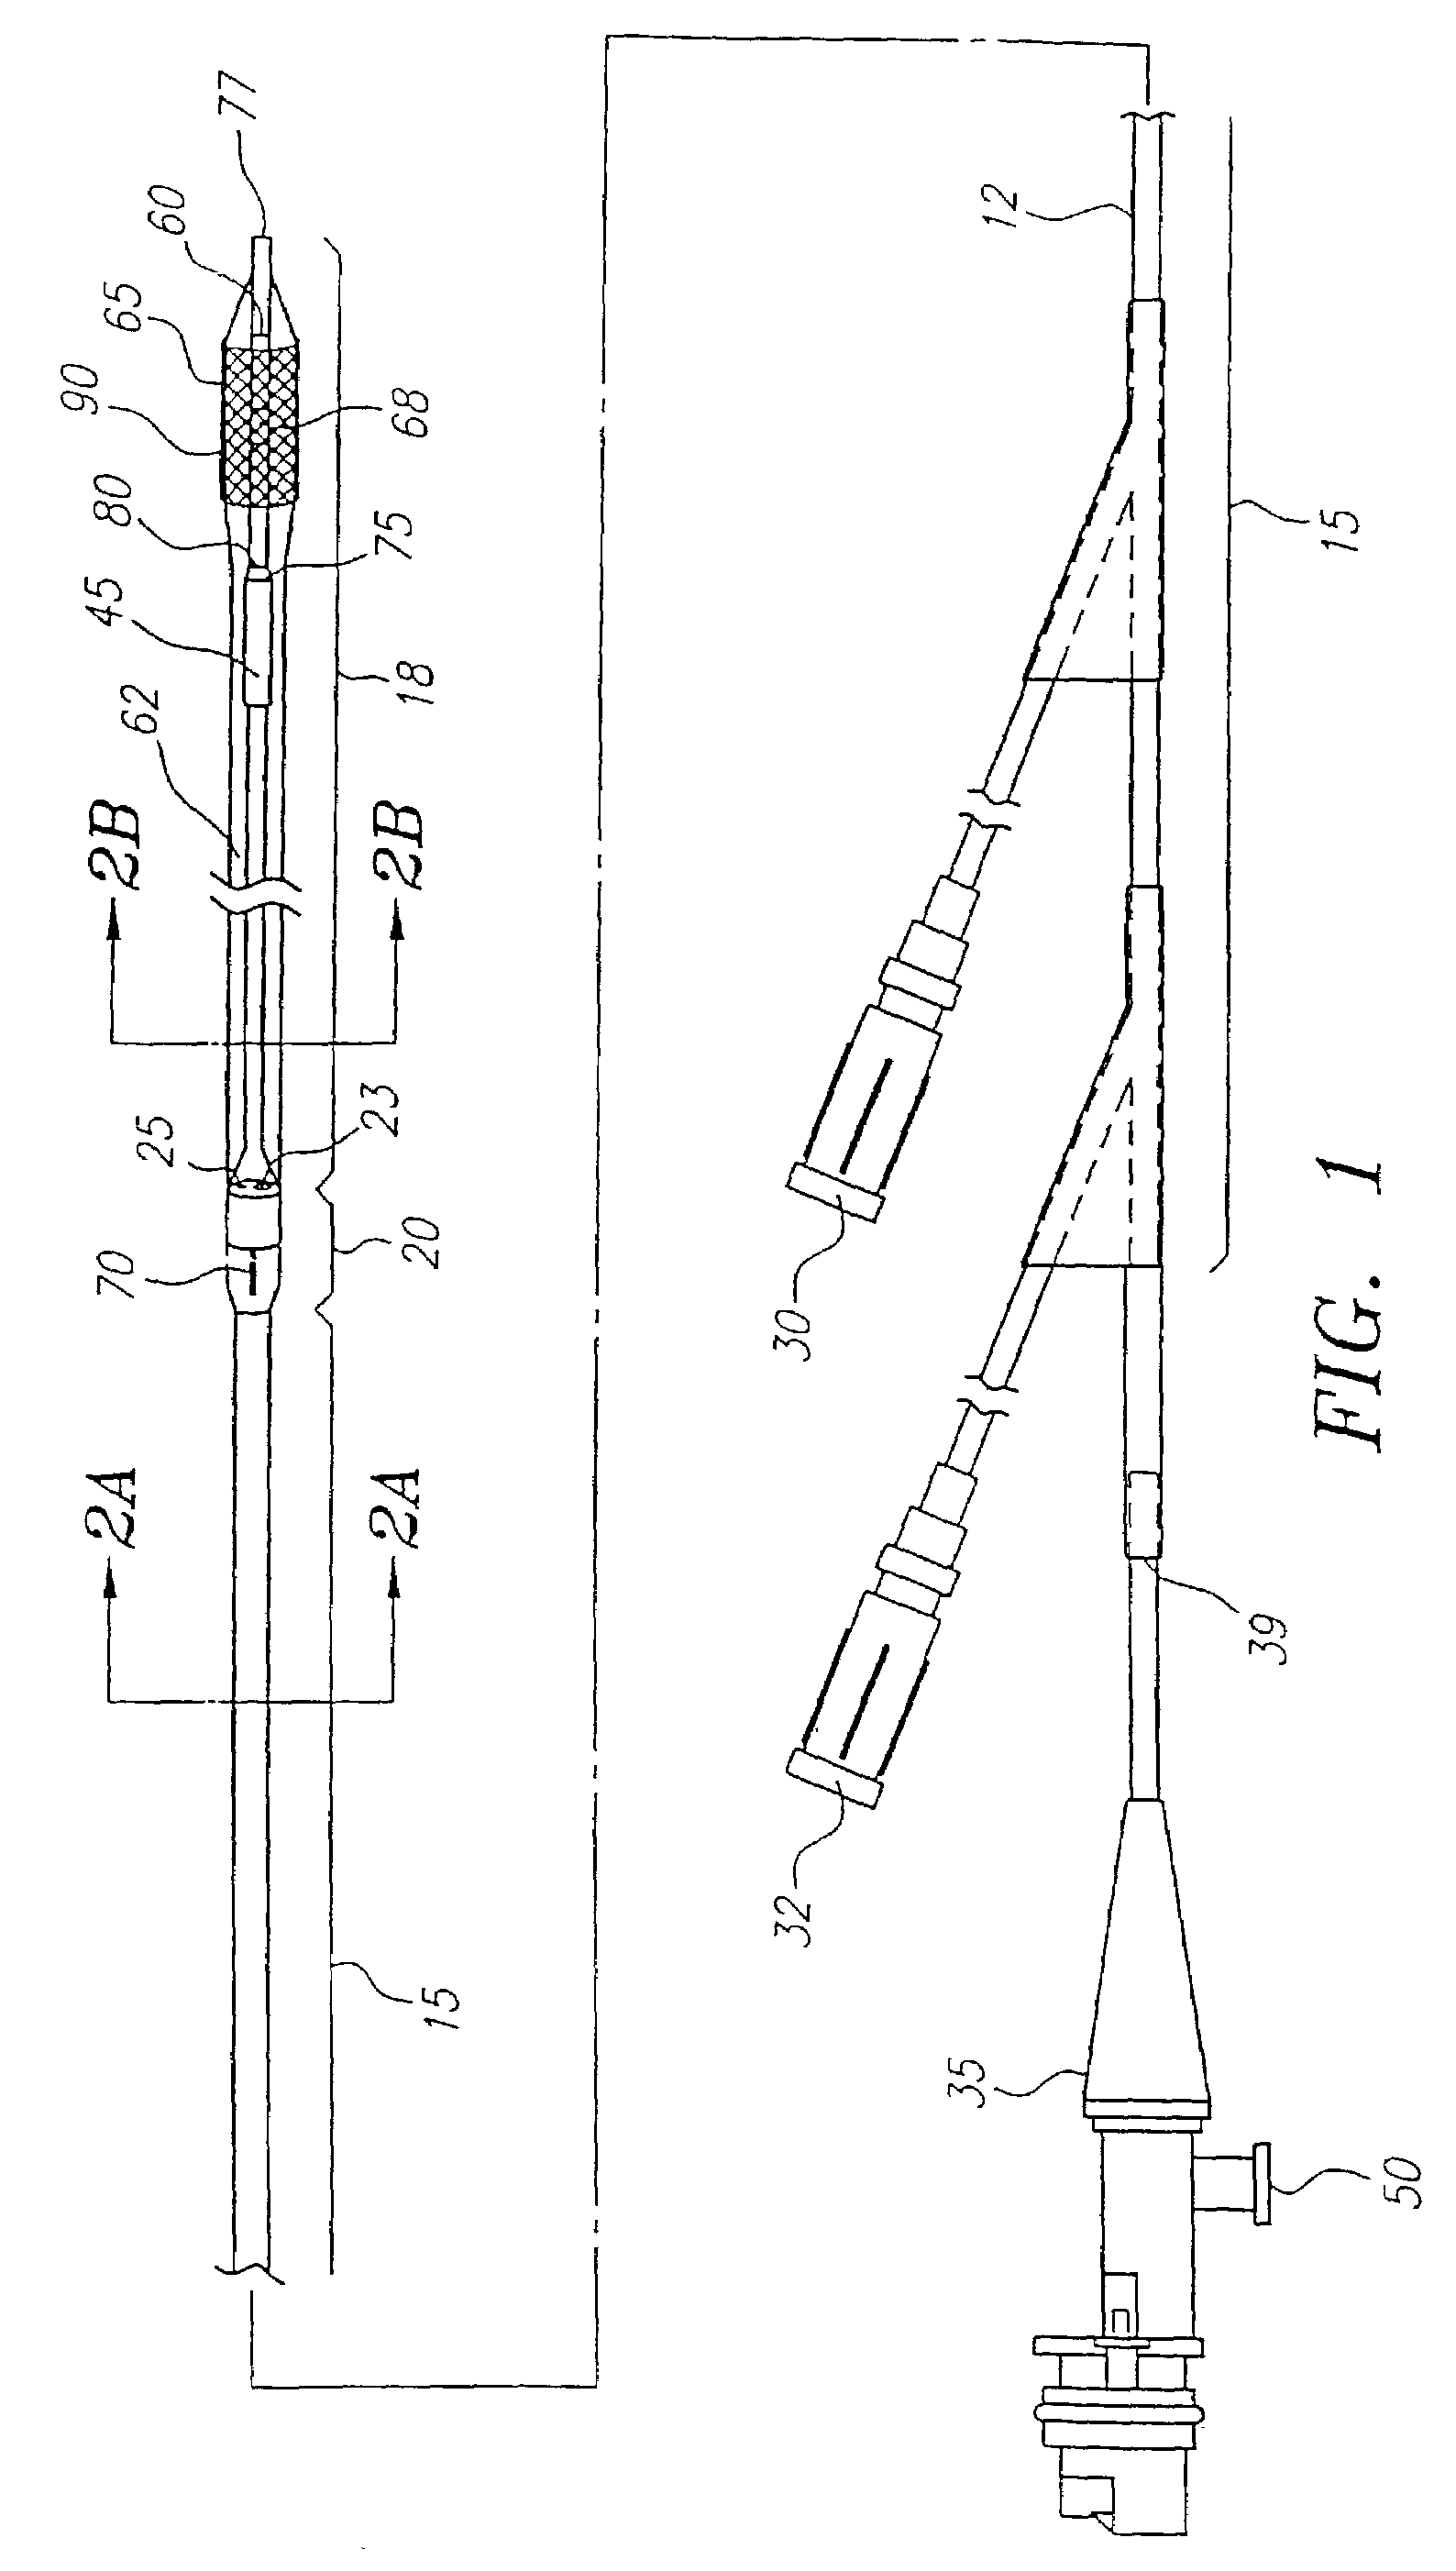 Catheter system having imaging, balloon angioplasty, and stent deployment capabilities, and method of use for guided stent deployment